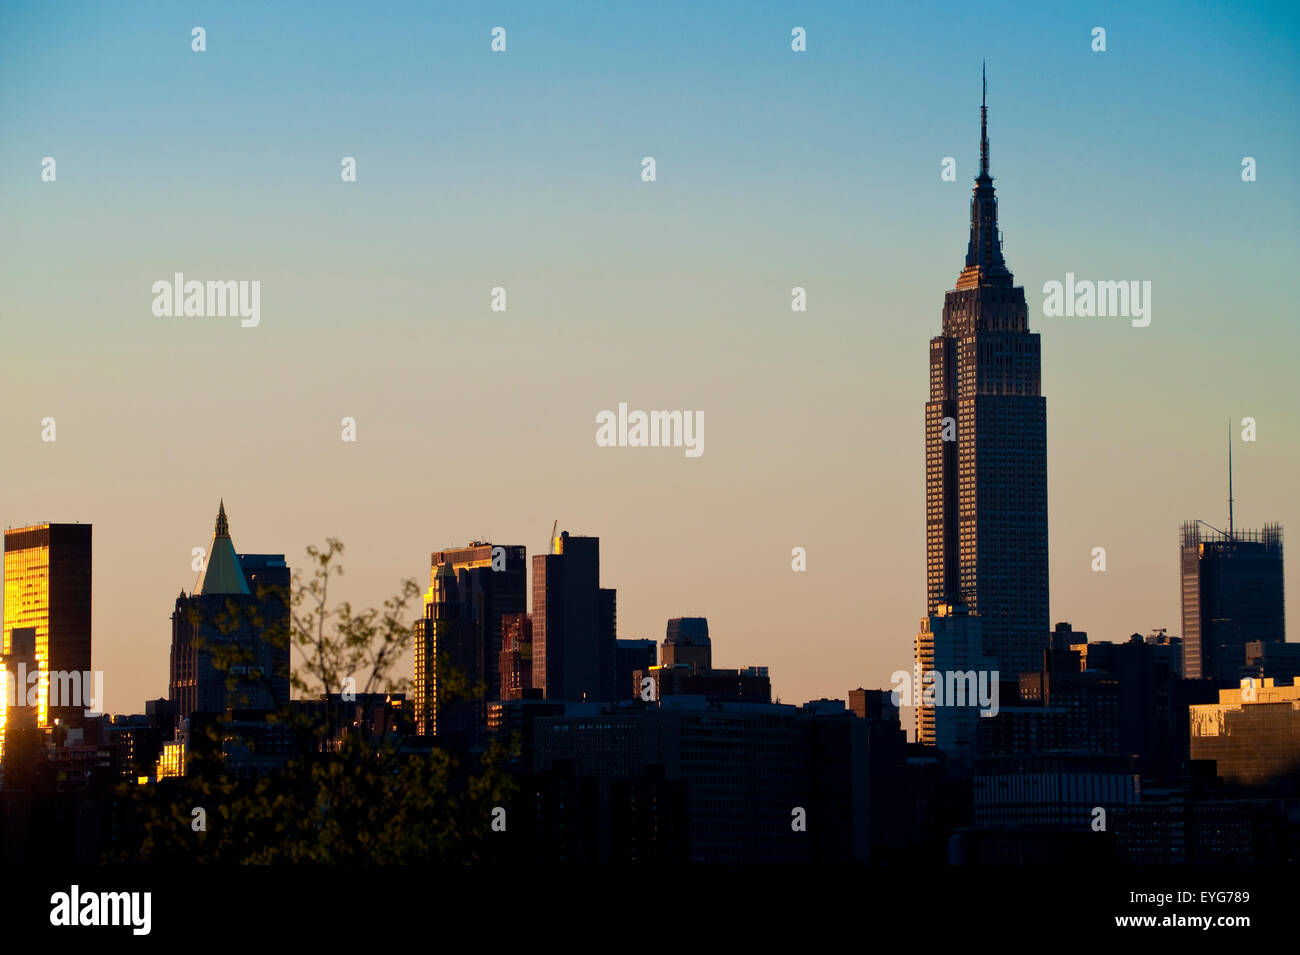 Views Of Manhattan And The Empire State Building From East River State Park At Dusk, Williamsburg, Brooklyn, New York, Usa Stock Photo